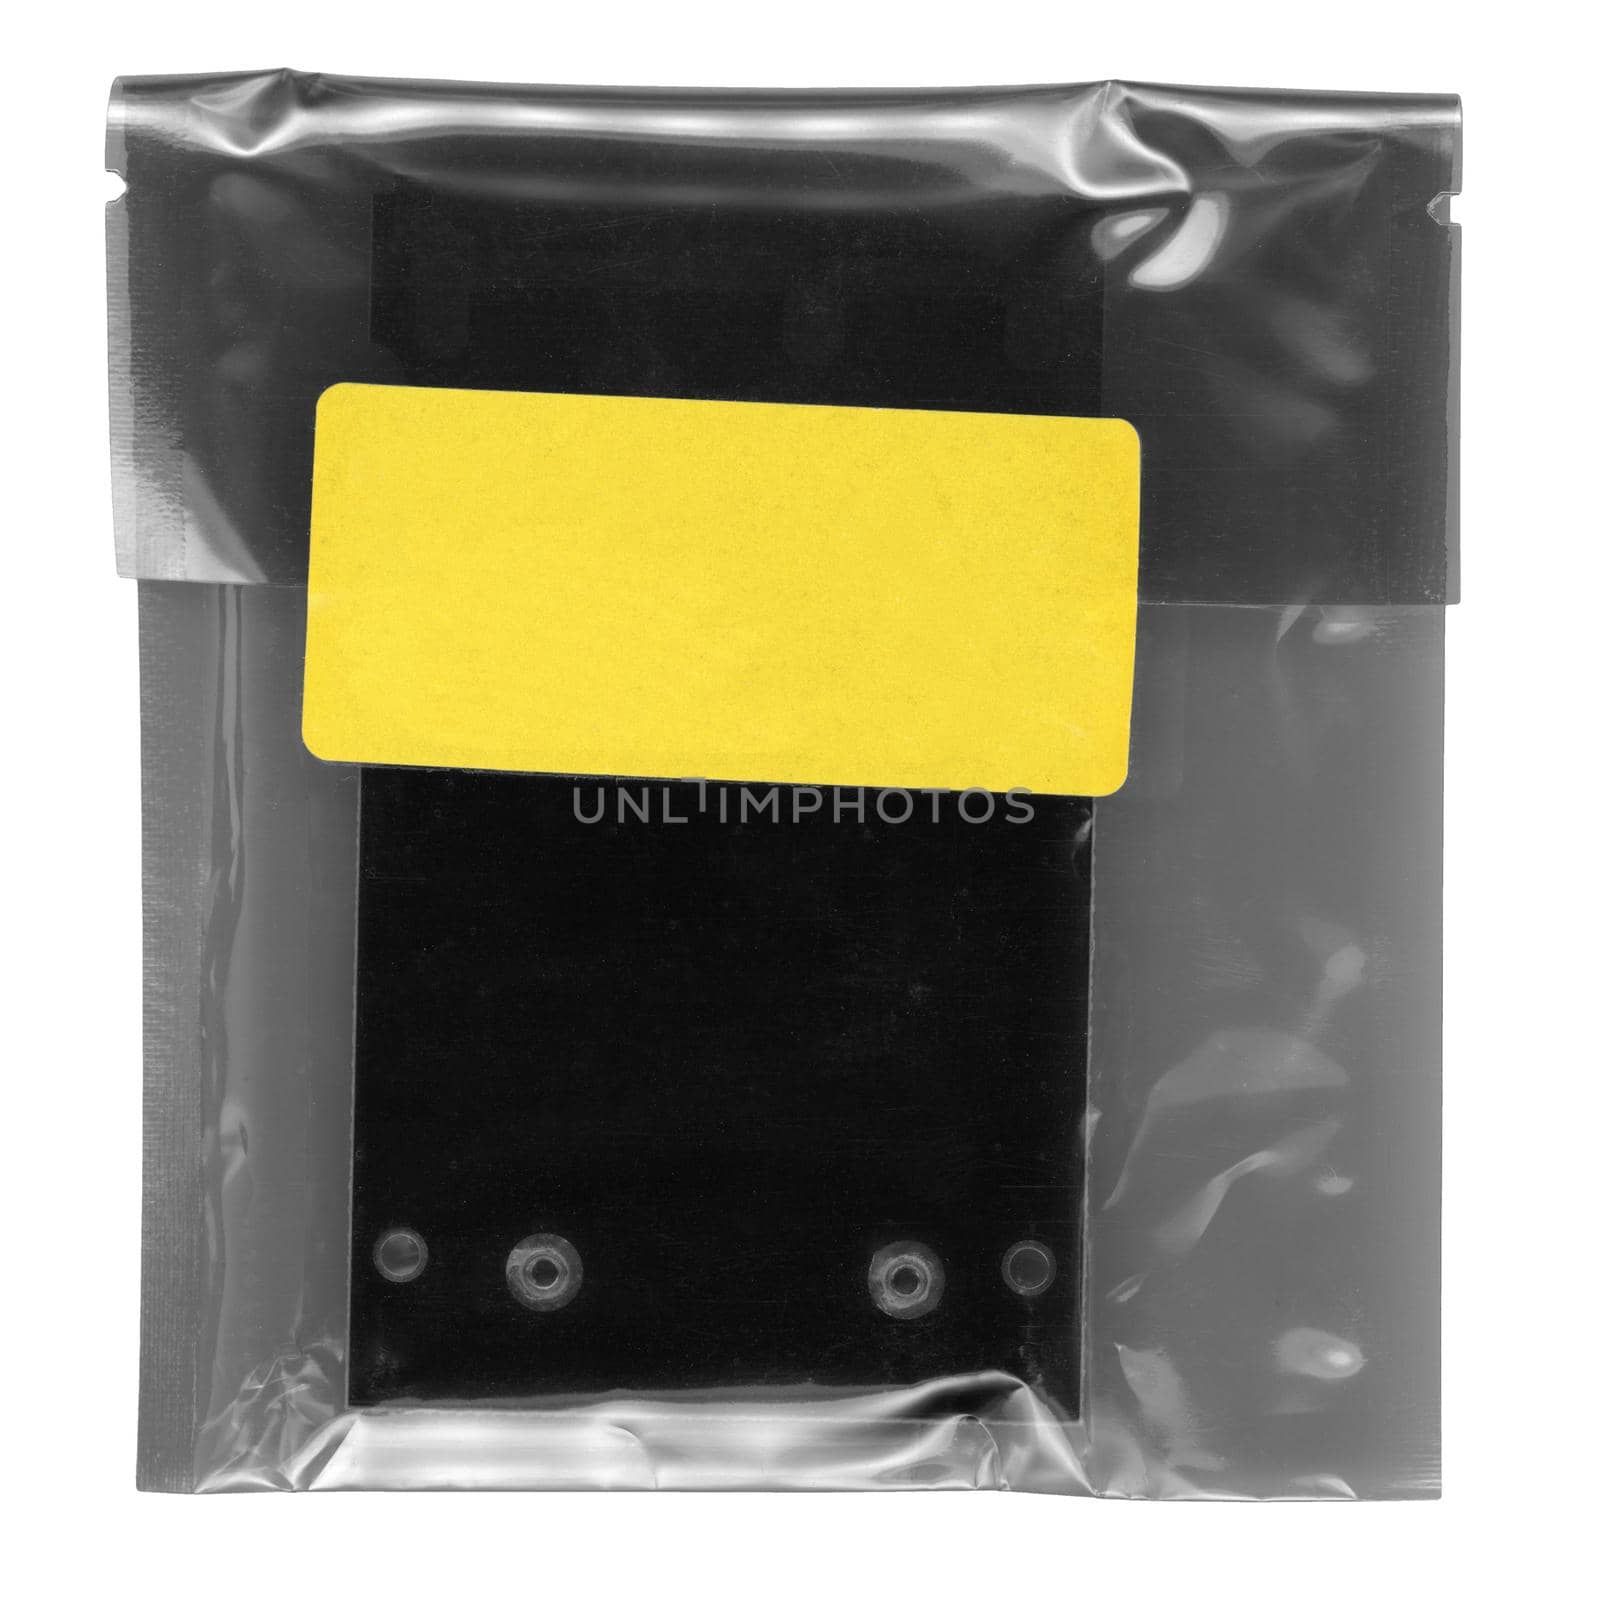 sachet with yellow paper tag label for product information isolated over white background